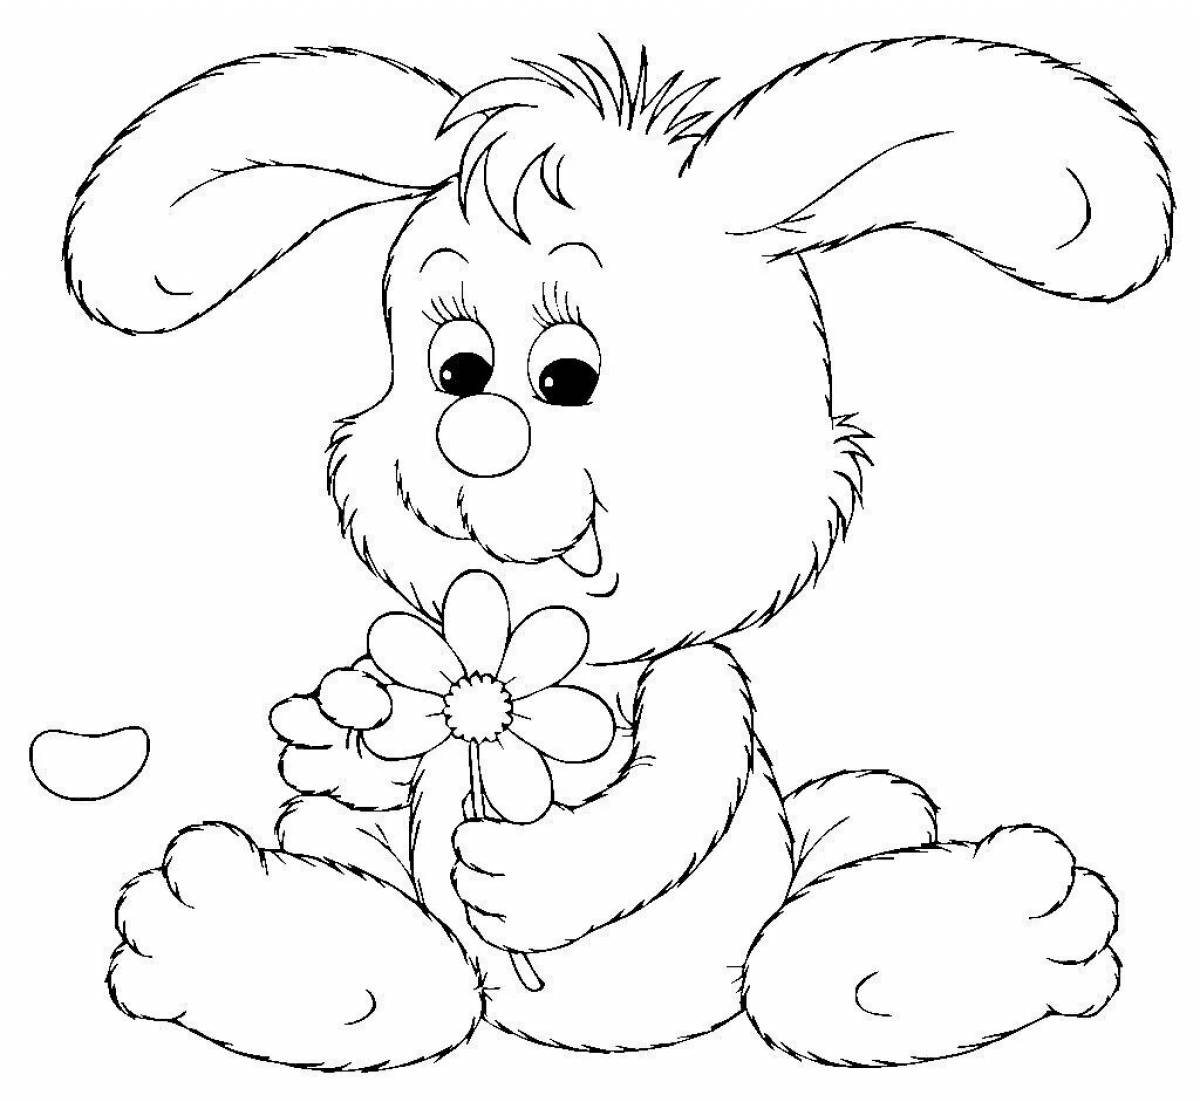 Awesome animal coloring pages for kids